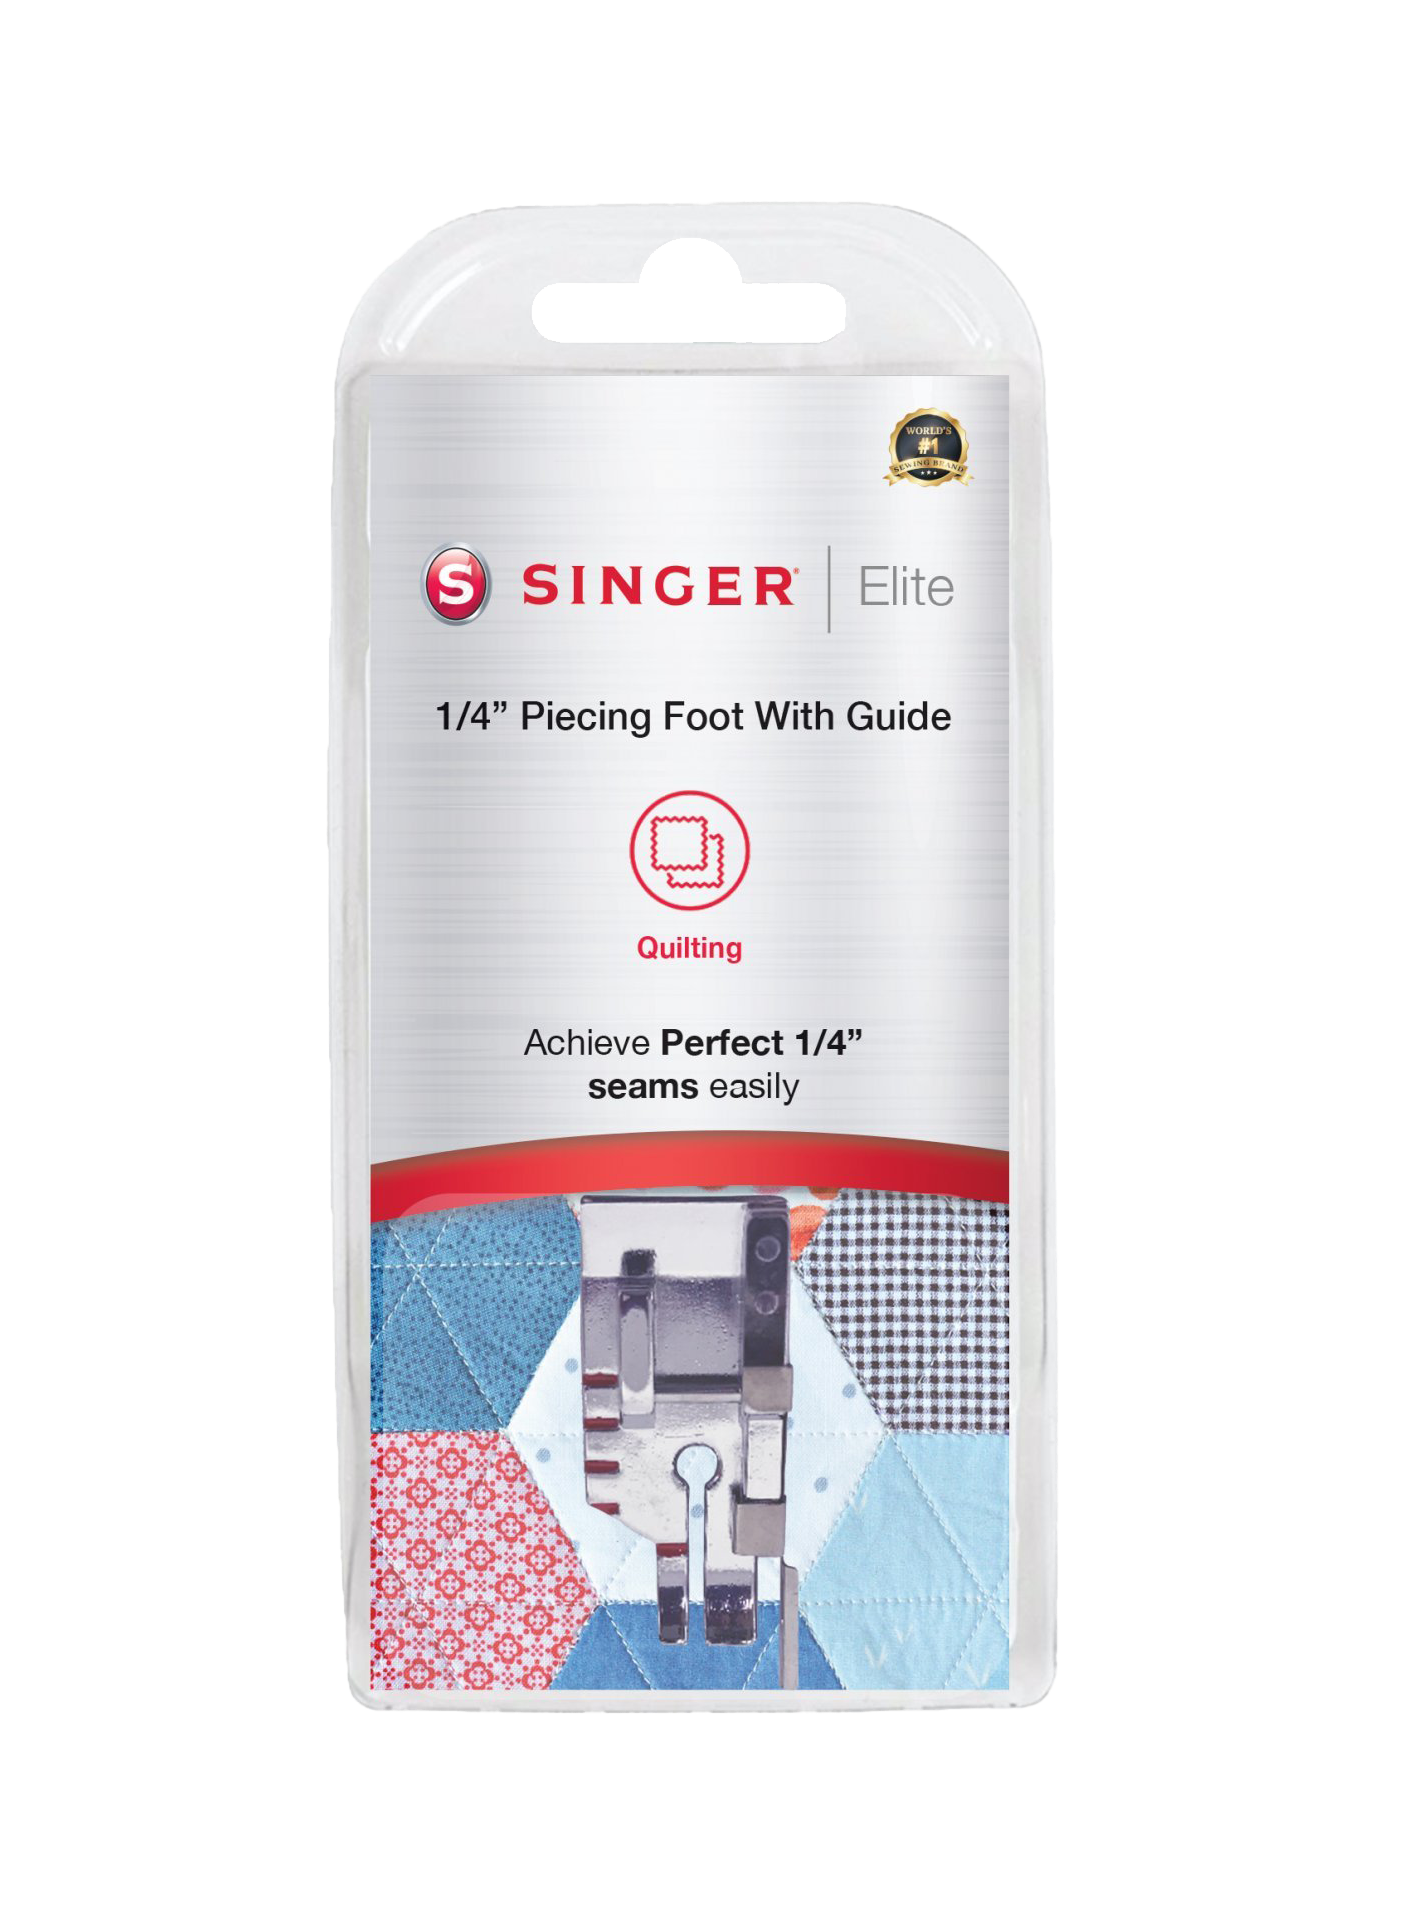 Singer Elite 1/4" Piecing Foot with Guide 250065796 for Sale at World Weidner